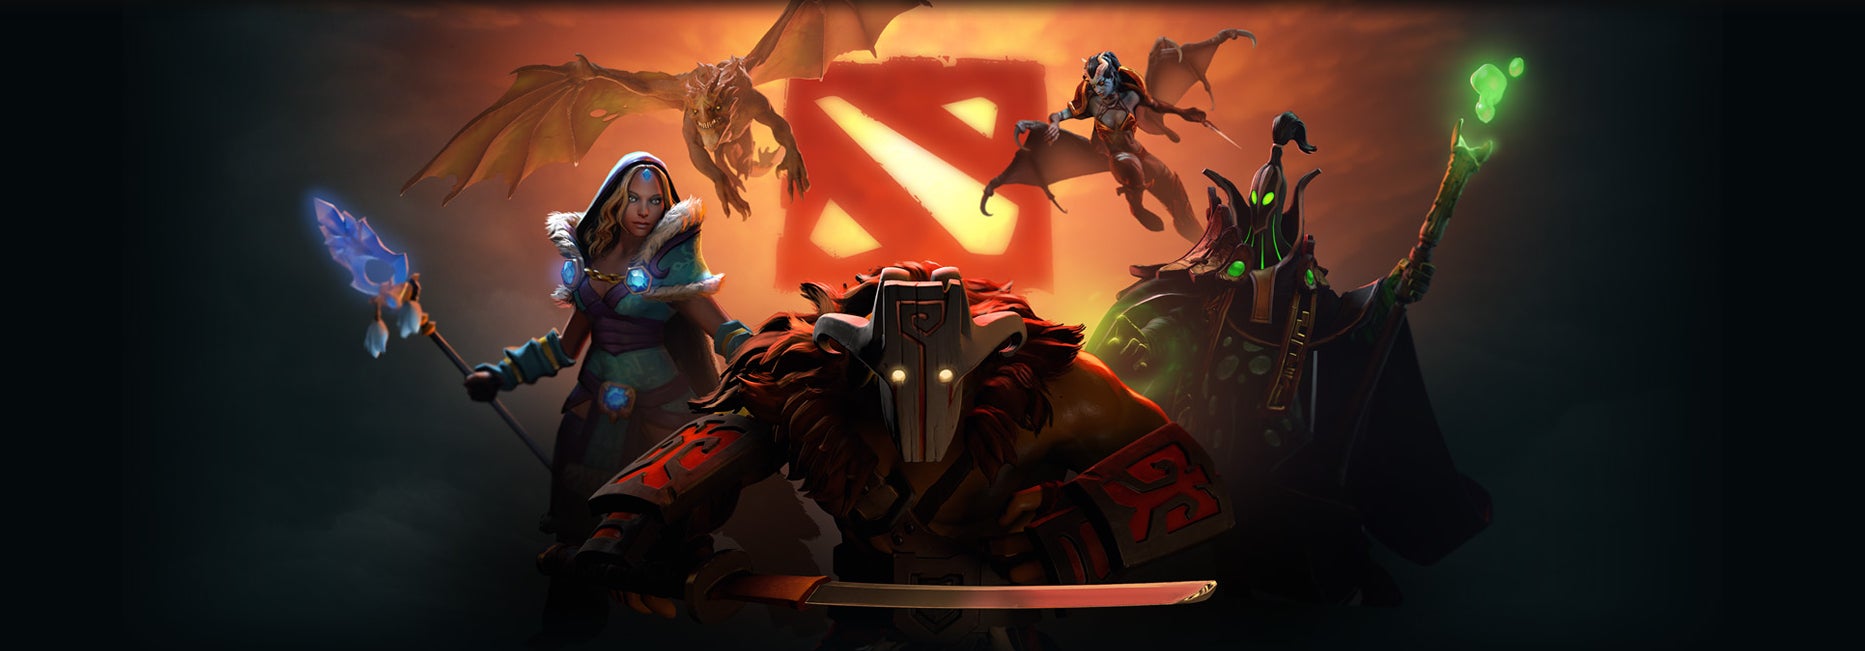 Image for DotA, You've Grown Up: A Look Back